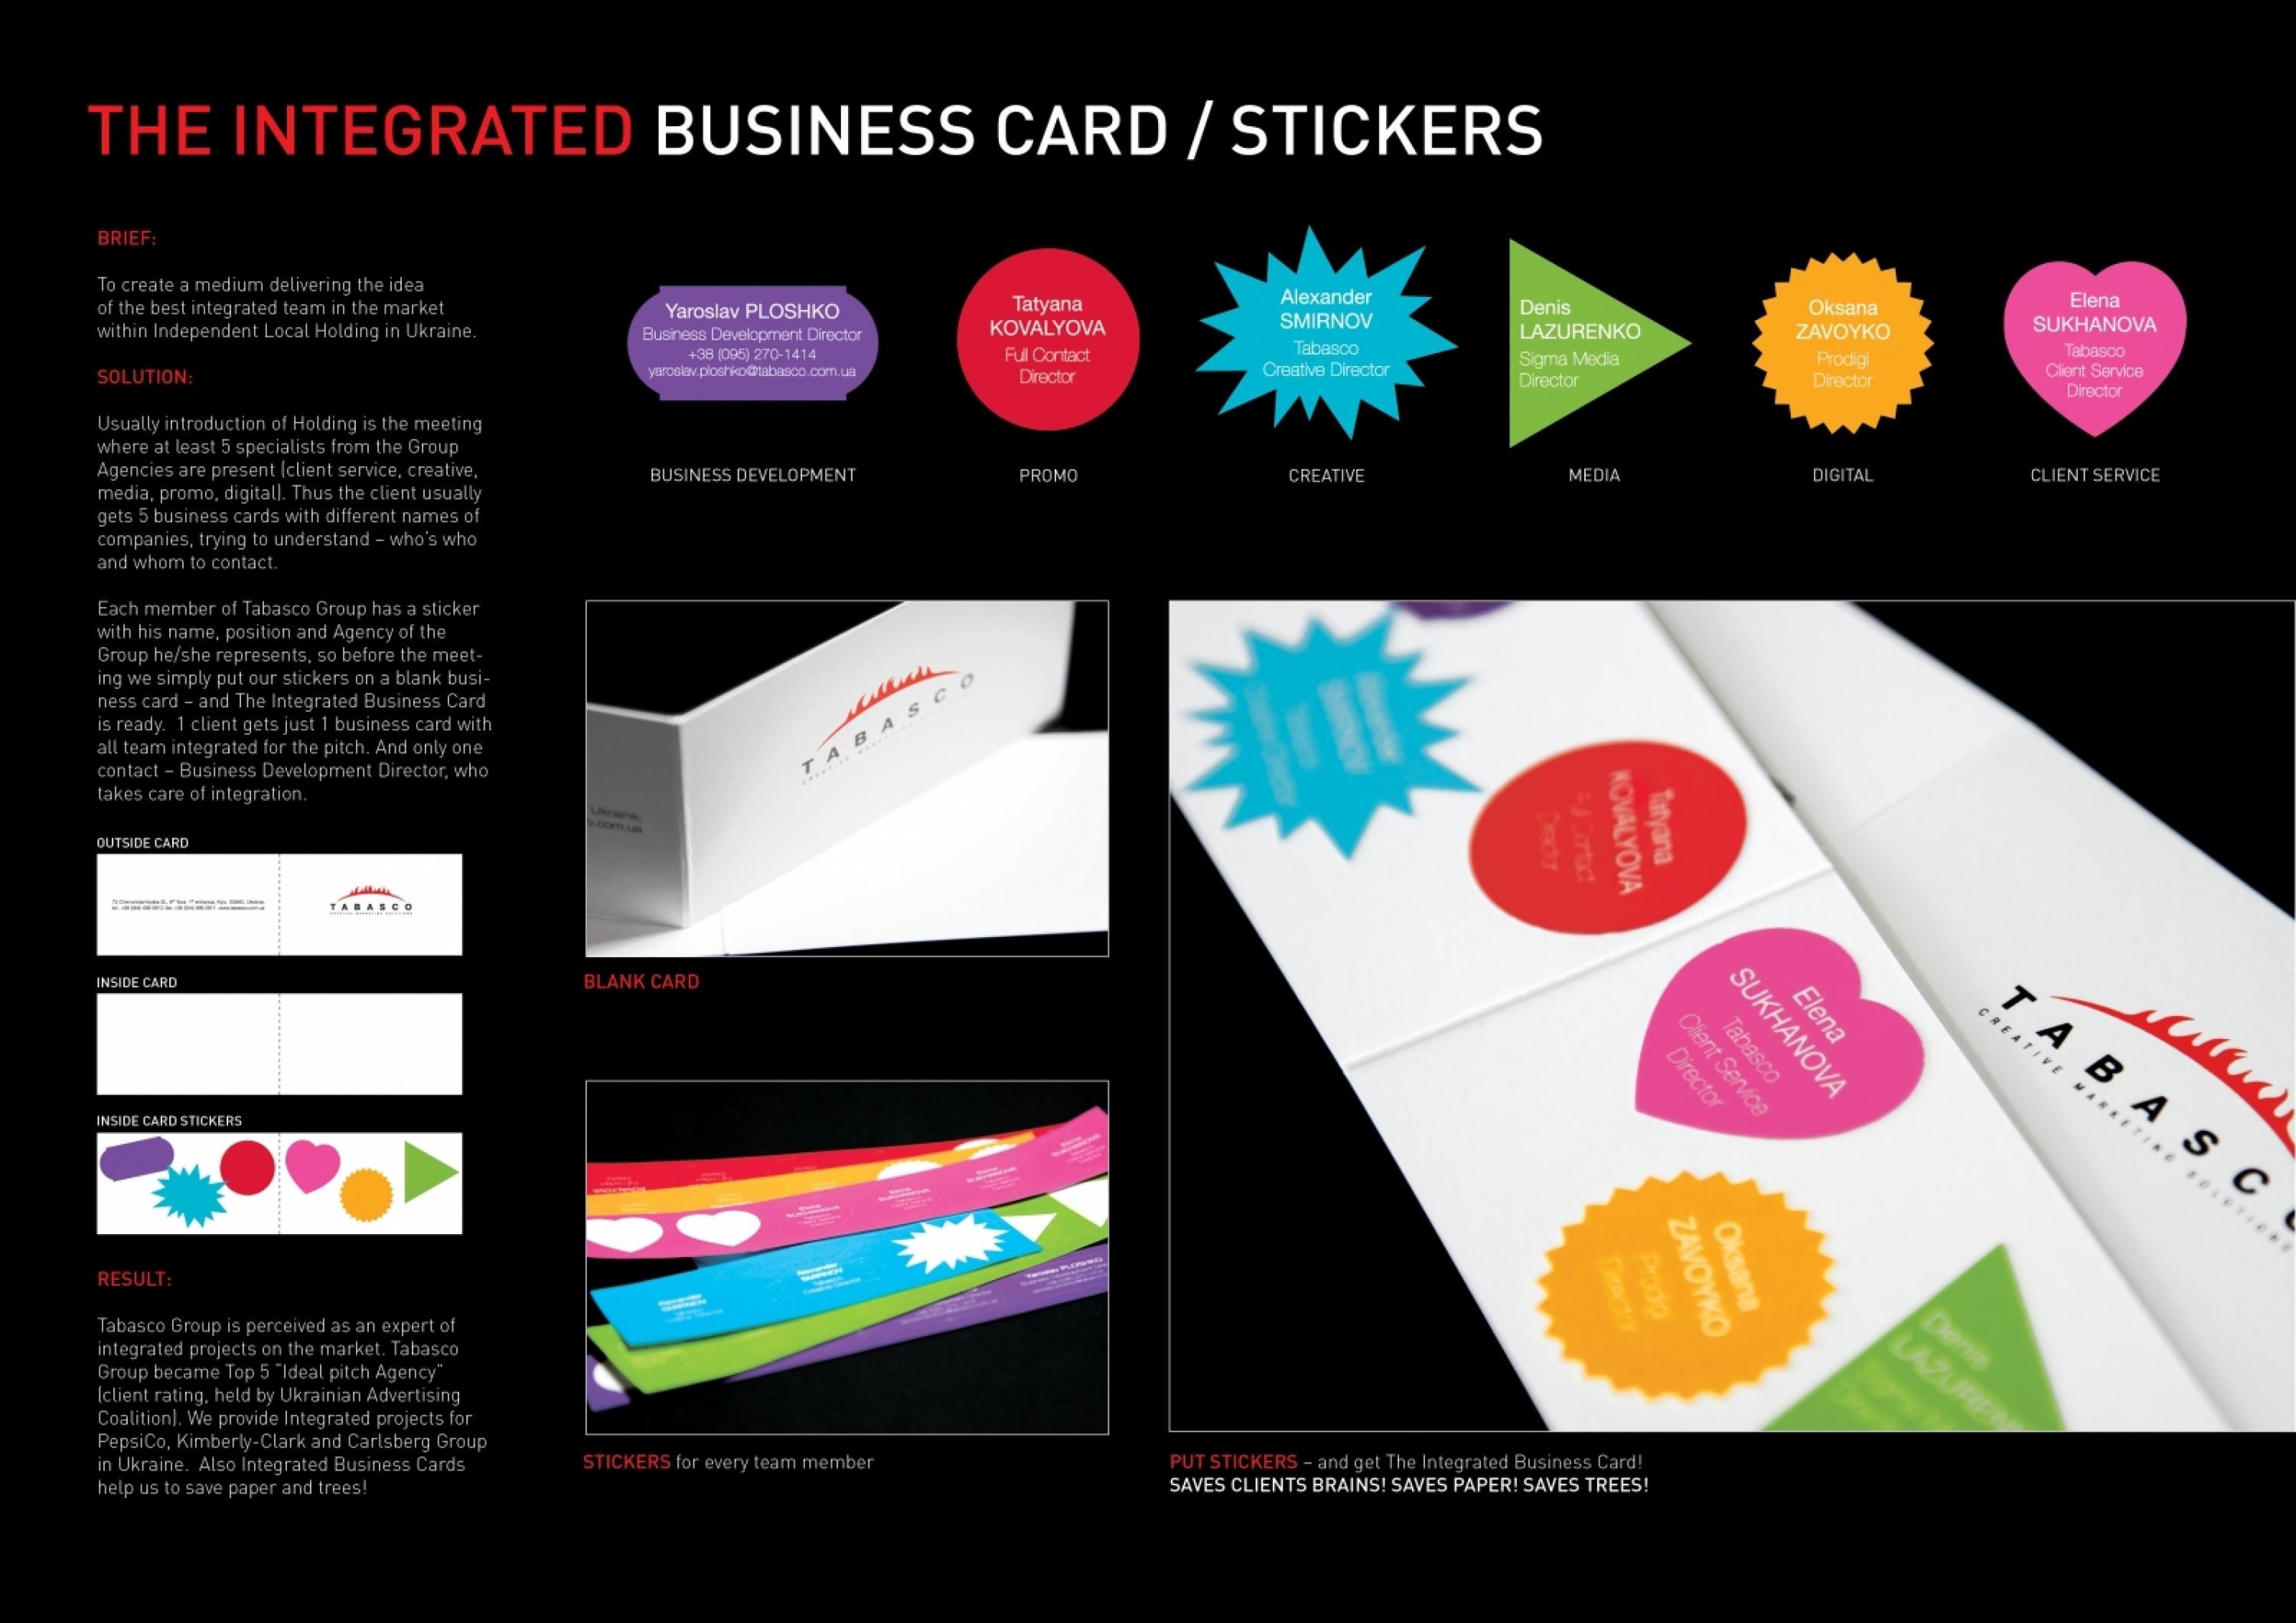 INTEGRATED BUSINESS CARDS